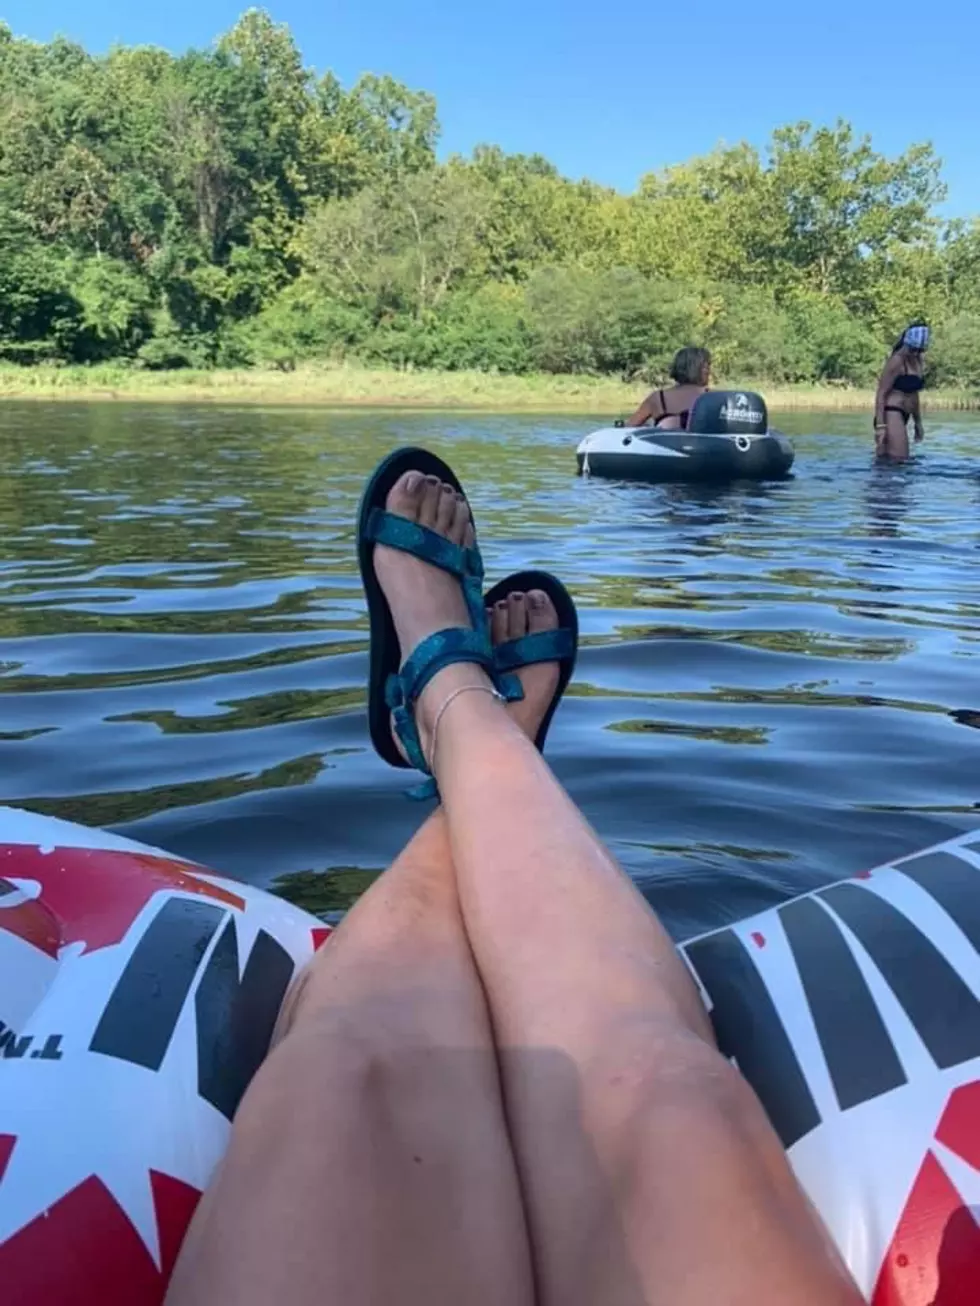 Going Floating this Weekend? You Need this Amazing Motorized Tube!